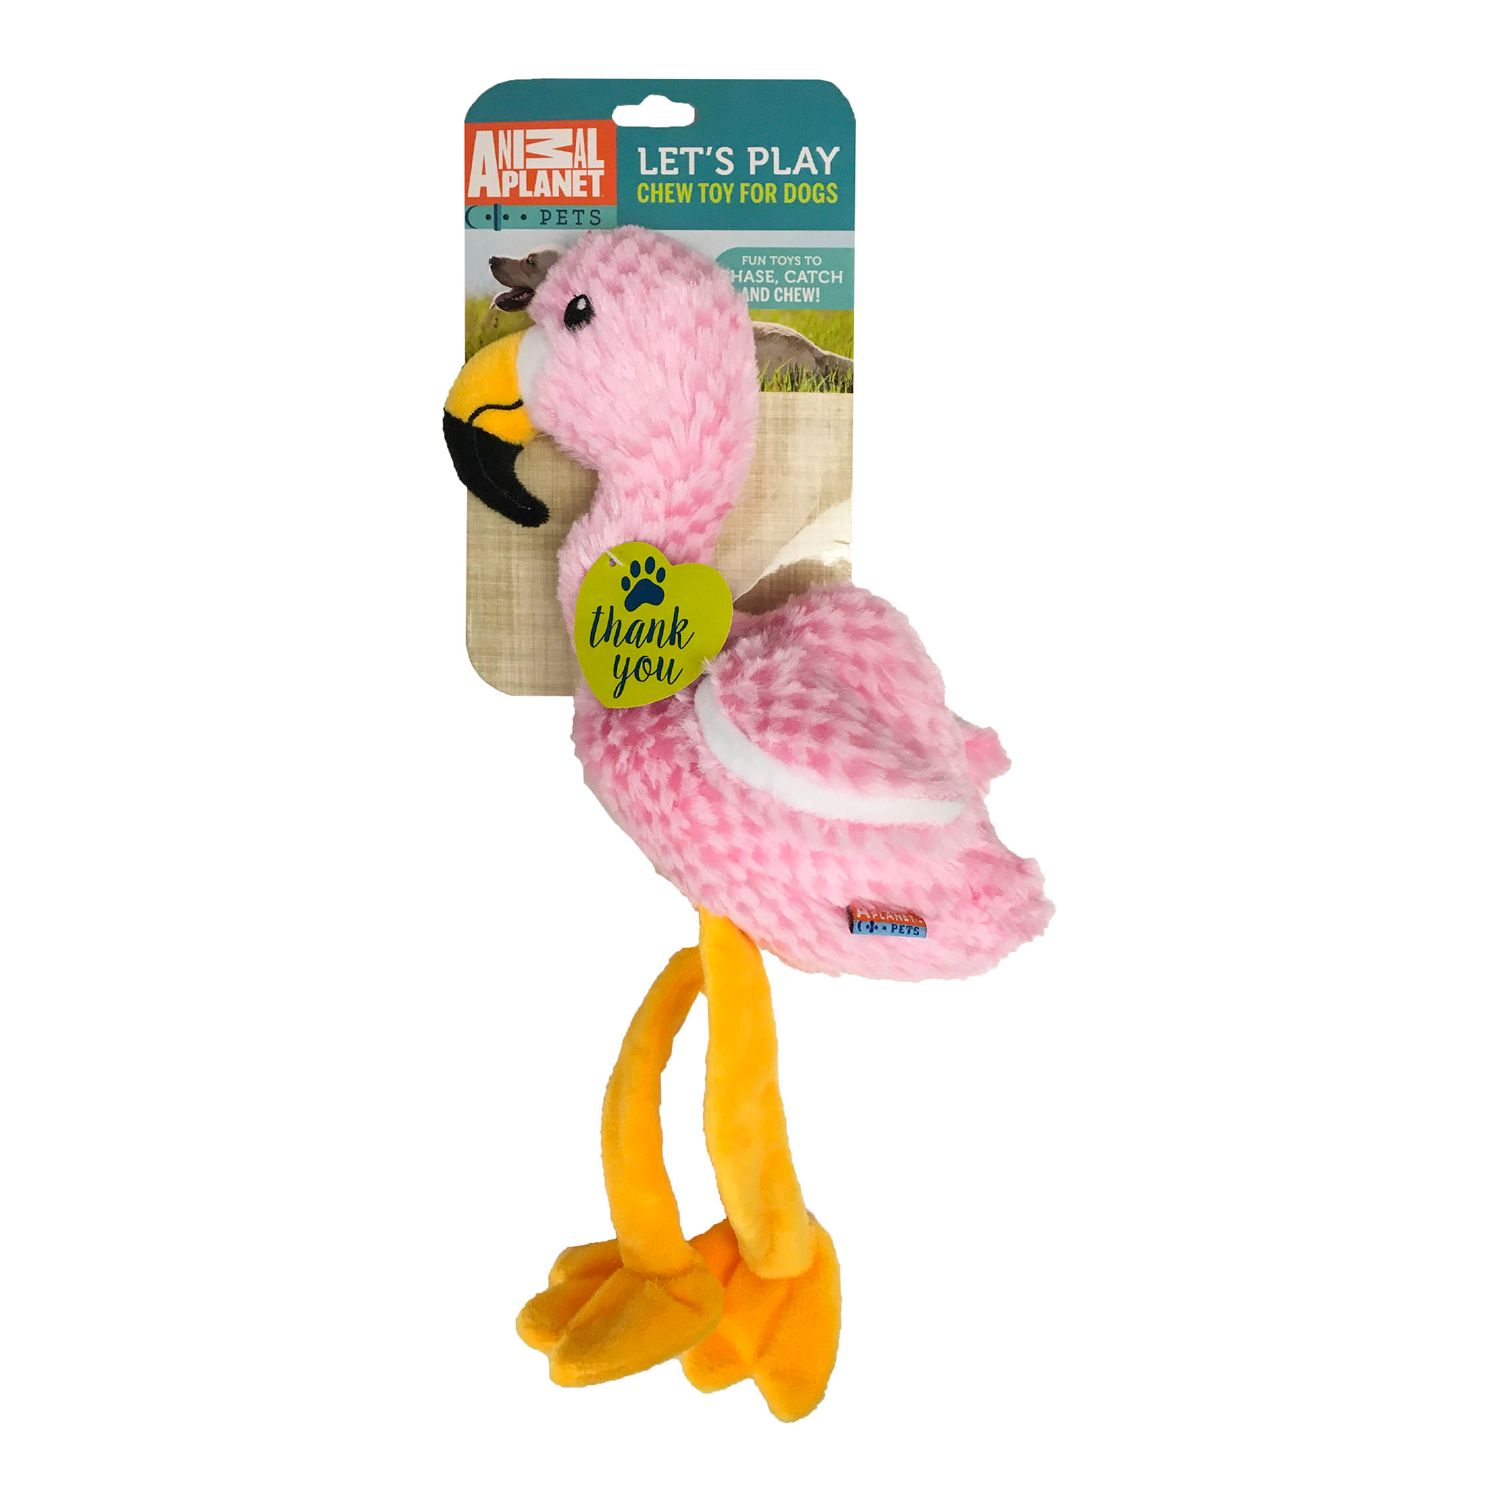 planet play dog toys